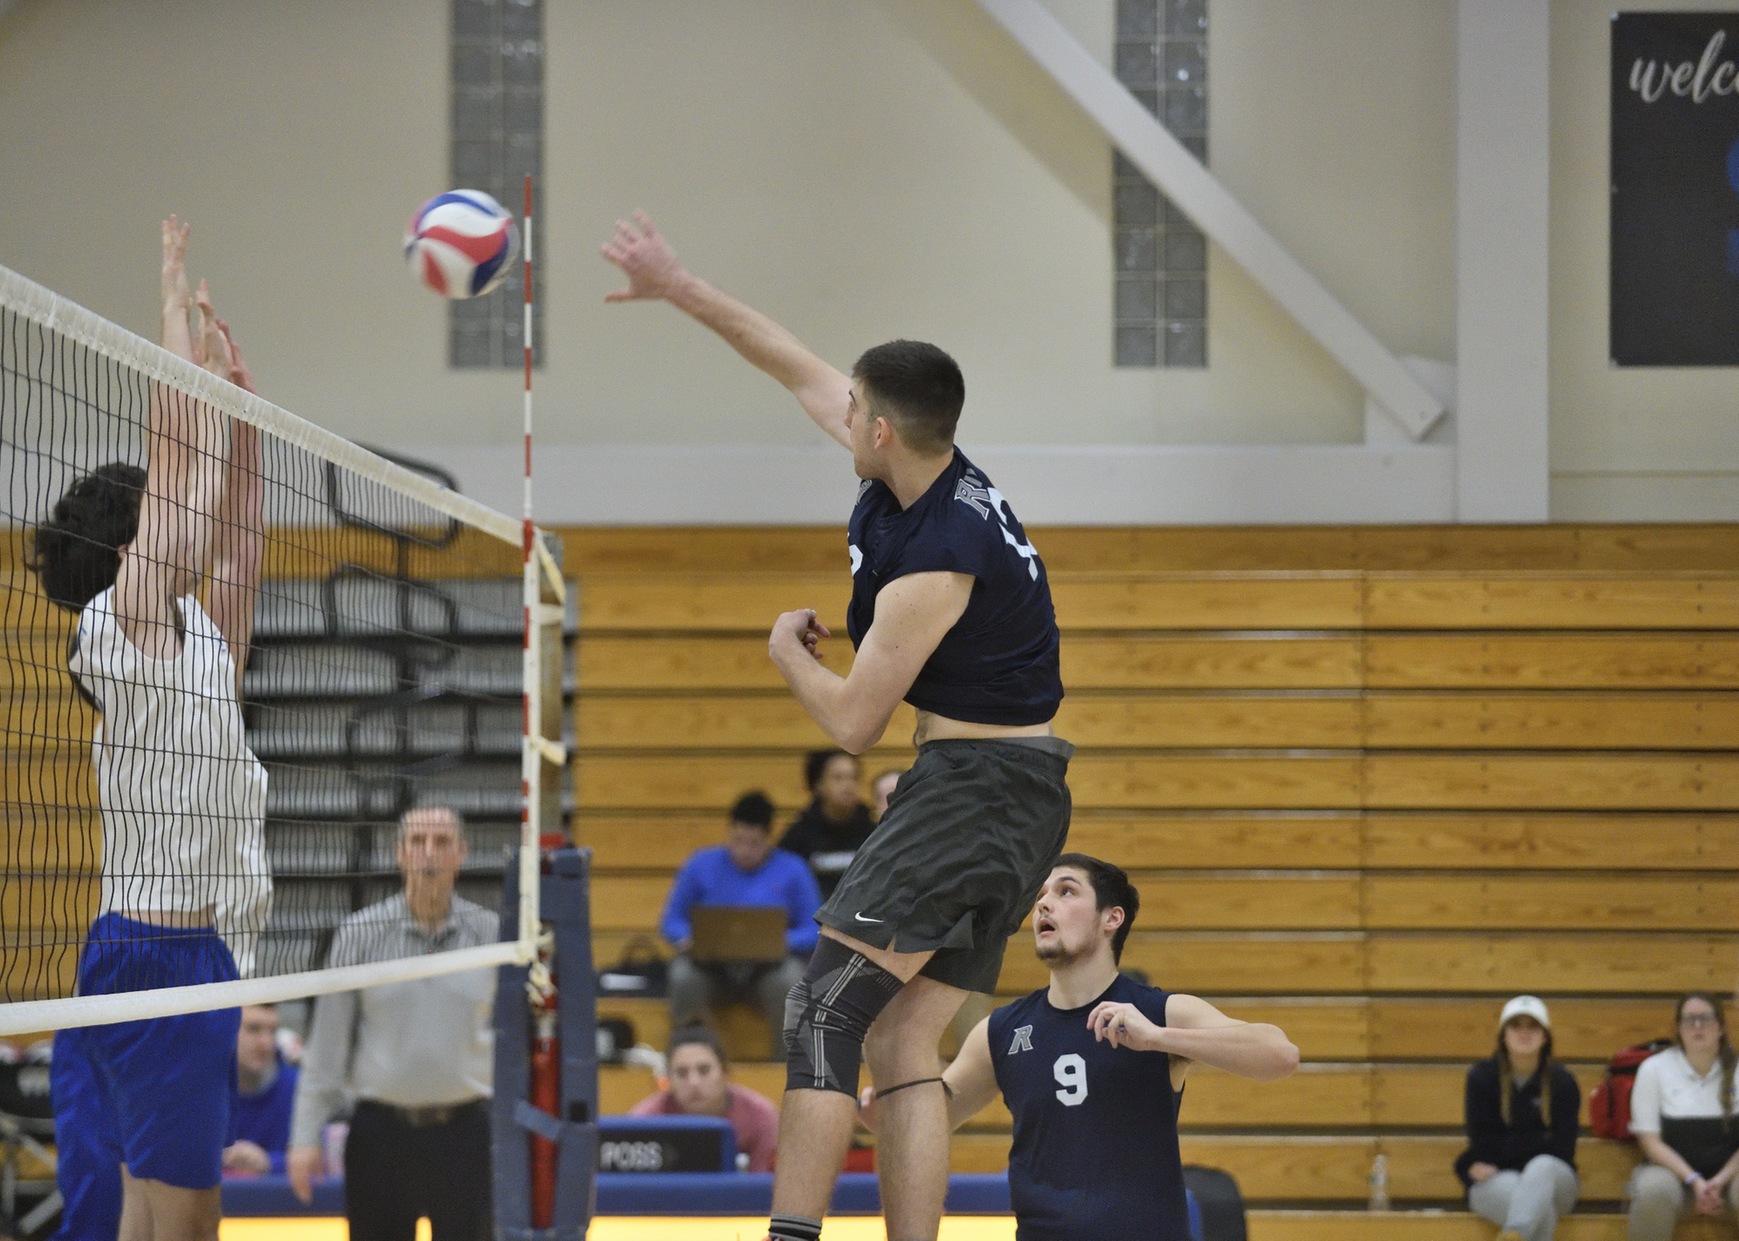 Men's Volleyball: Rivier sweeps match from Regis, 3-0.